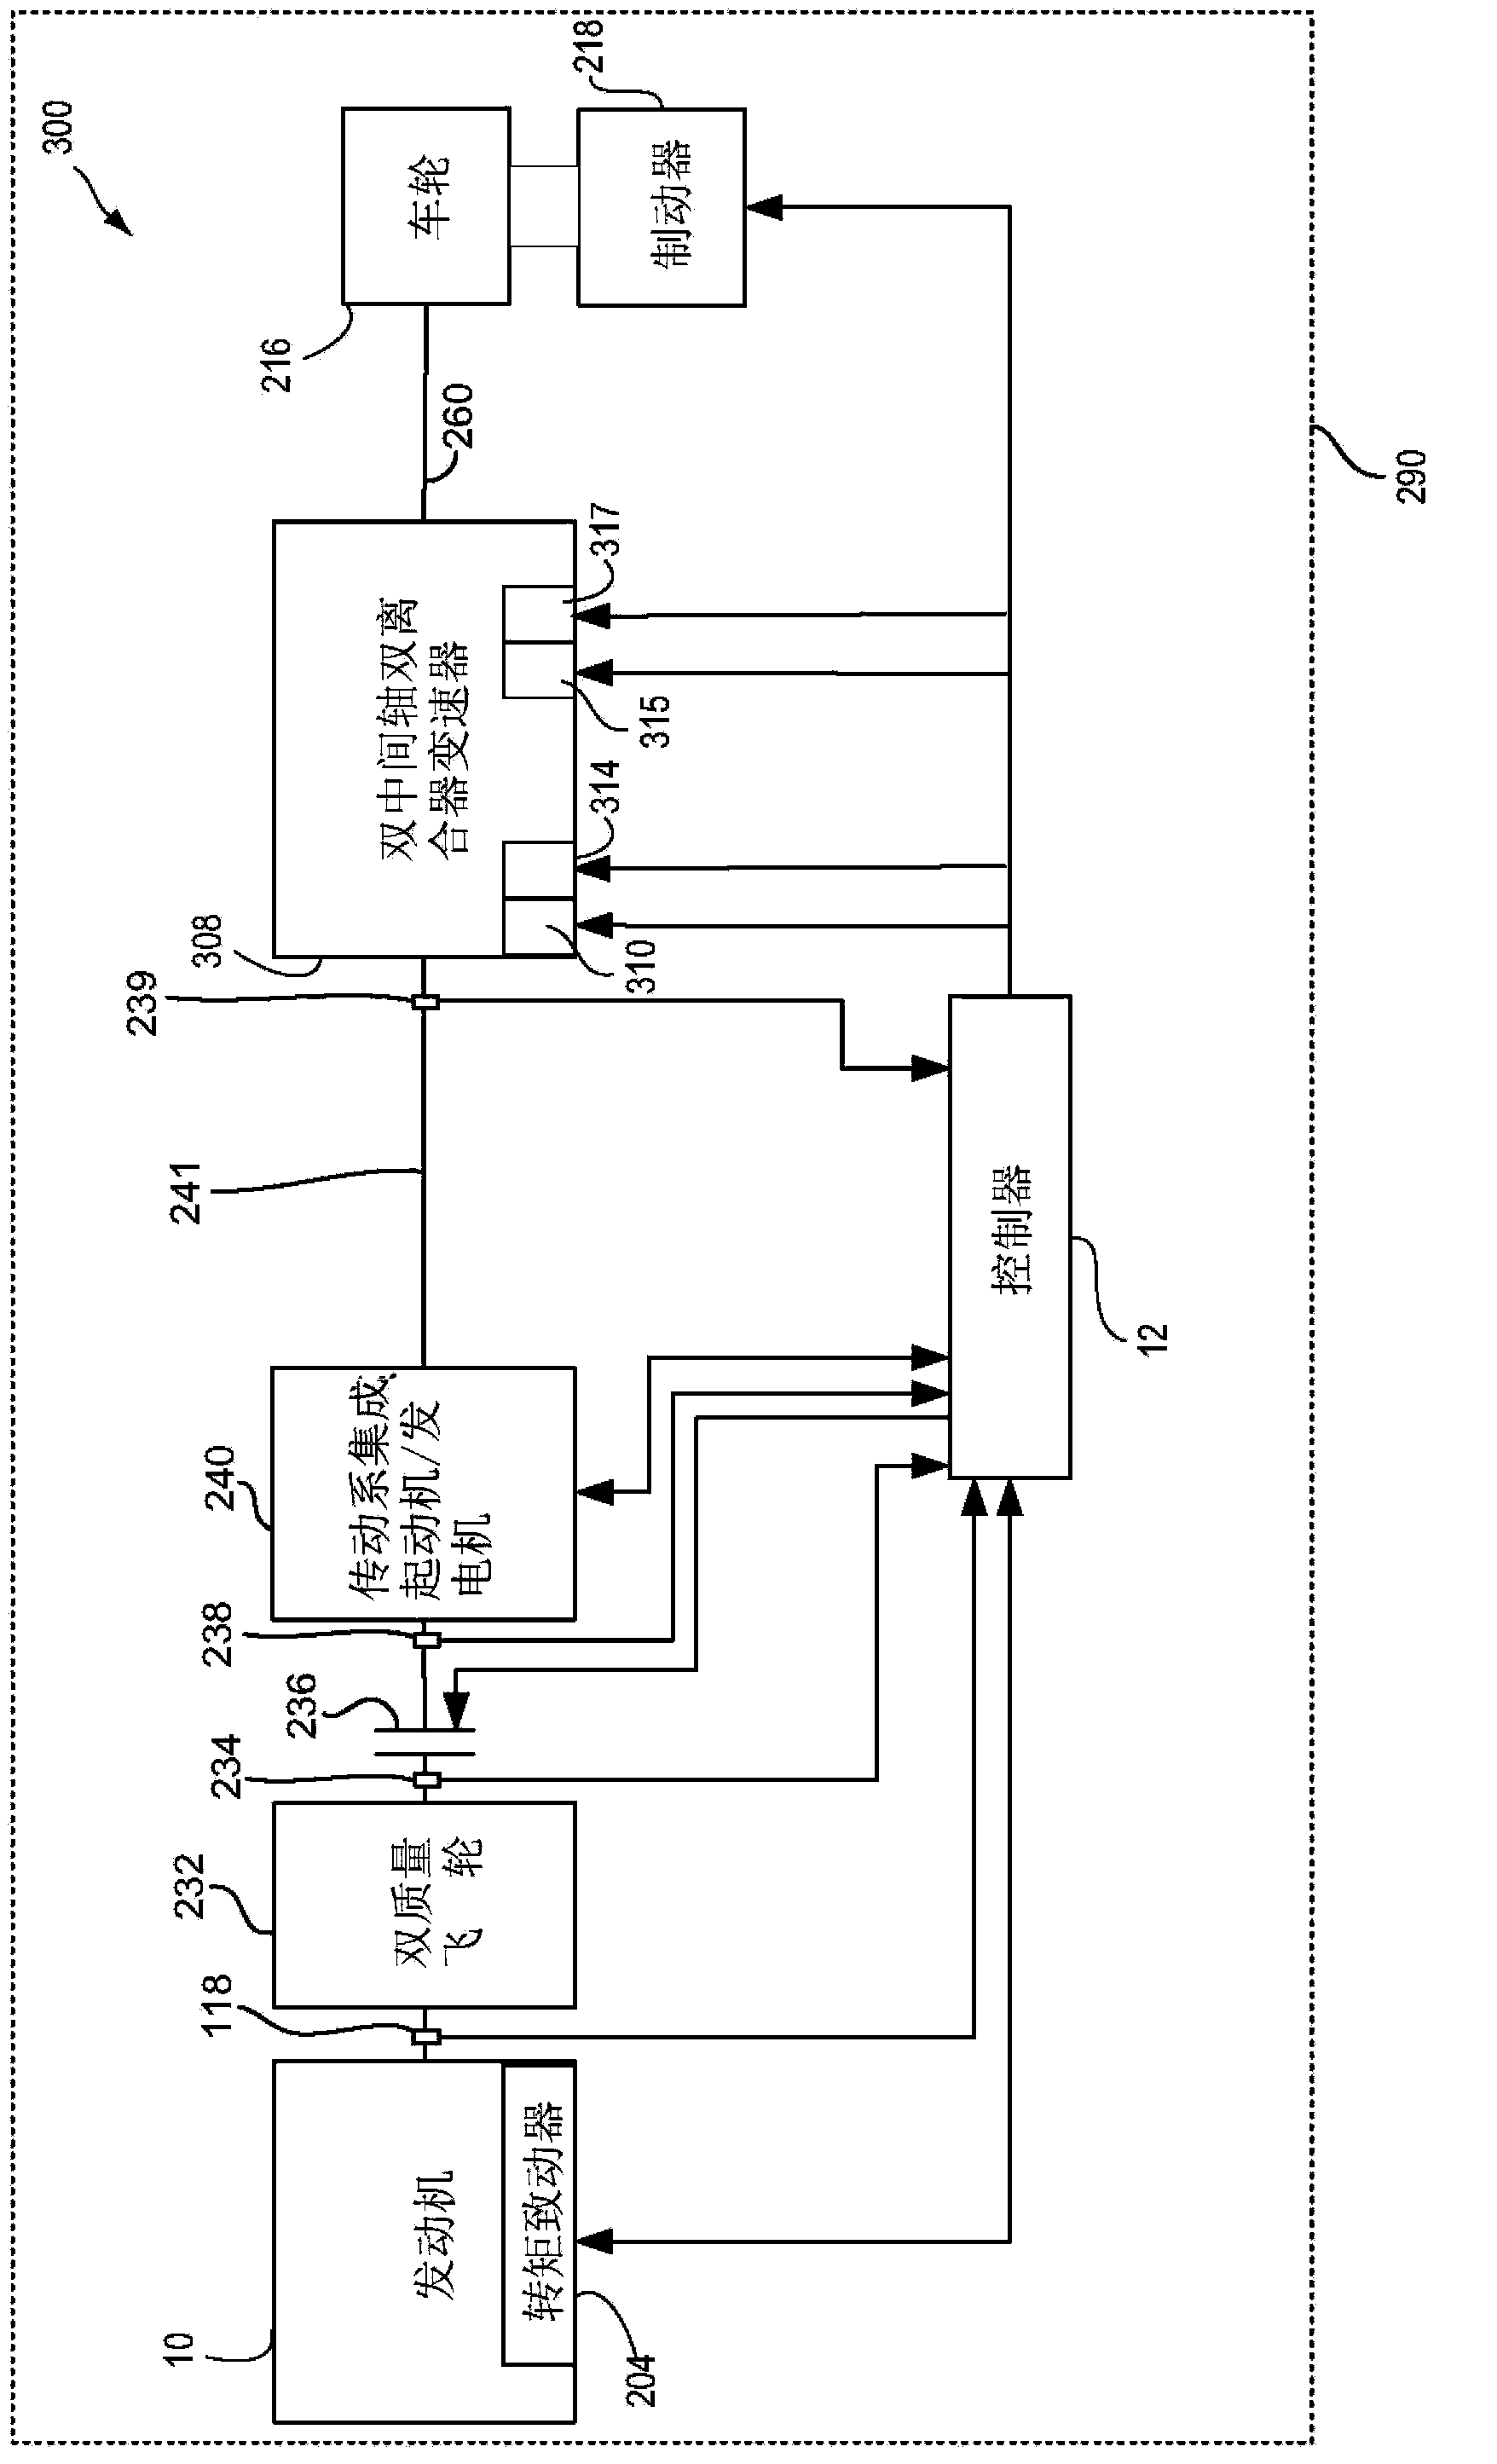 Method and system for power train disconnect-type clutch